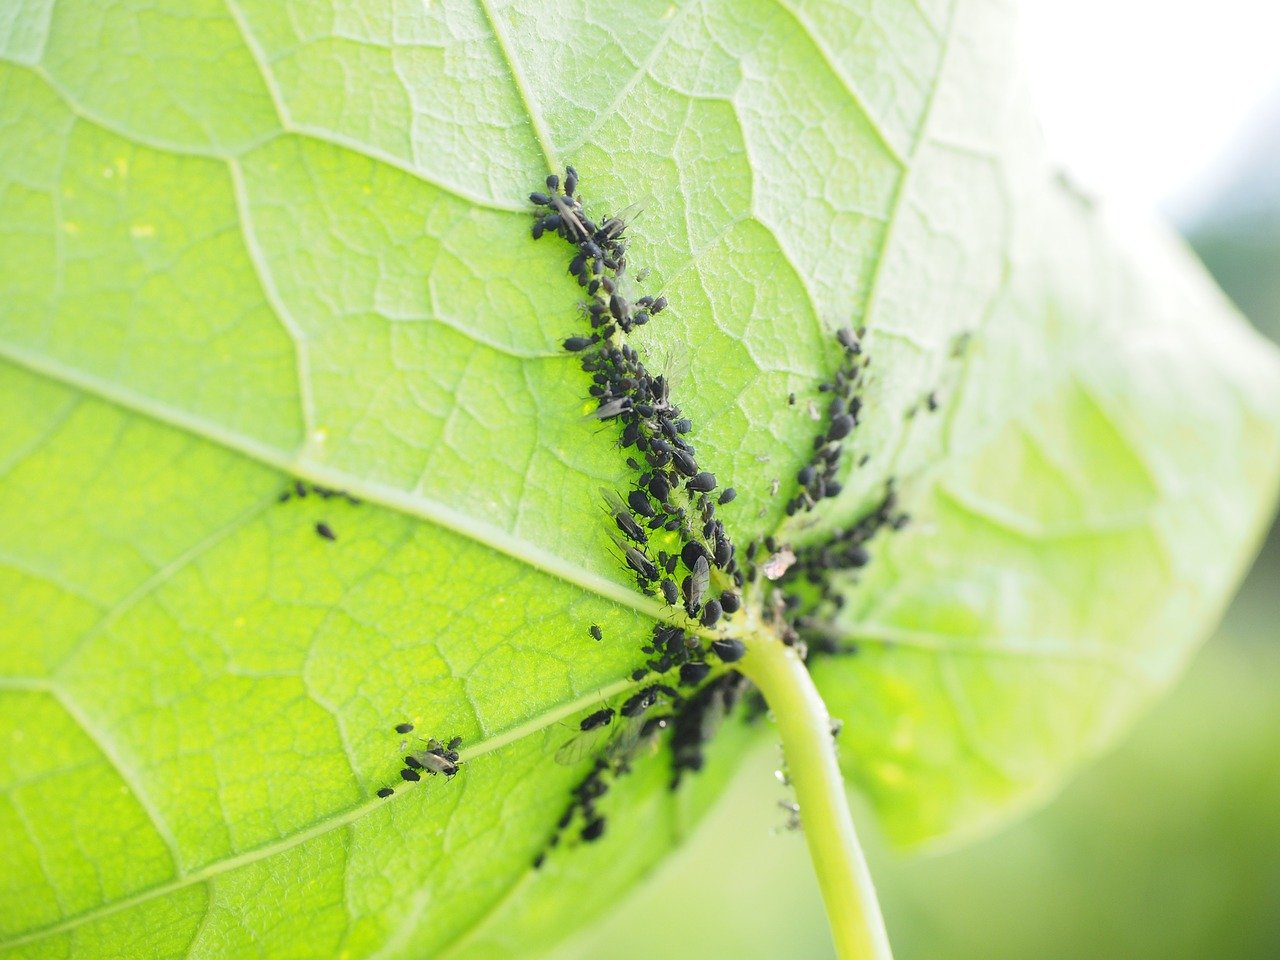 How do you get rid of pests from your garden?